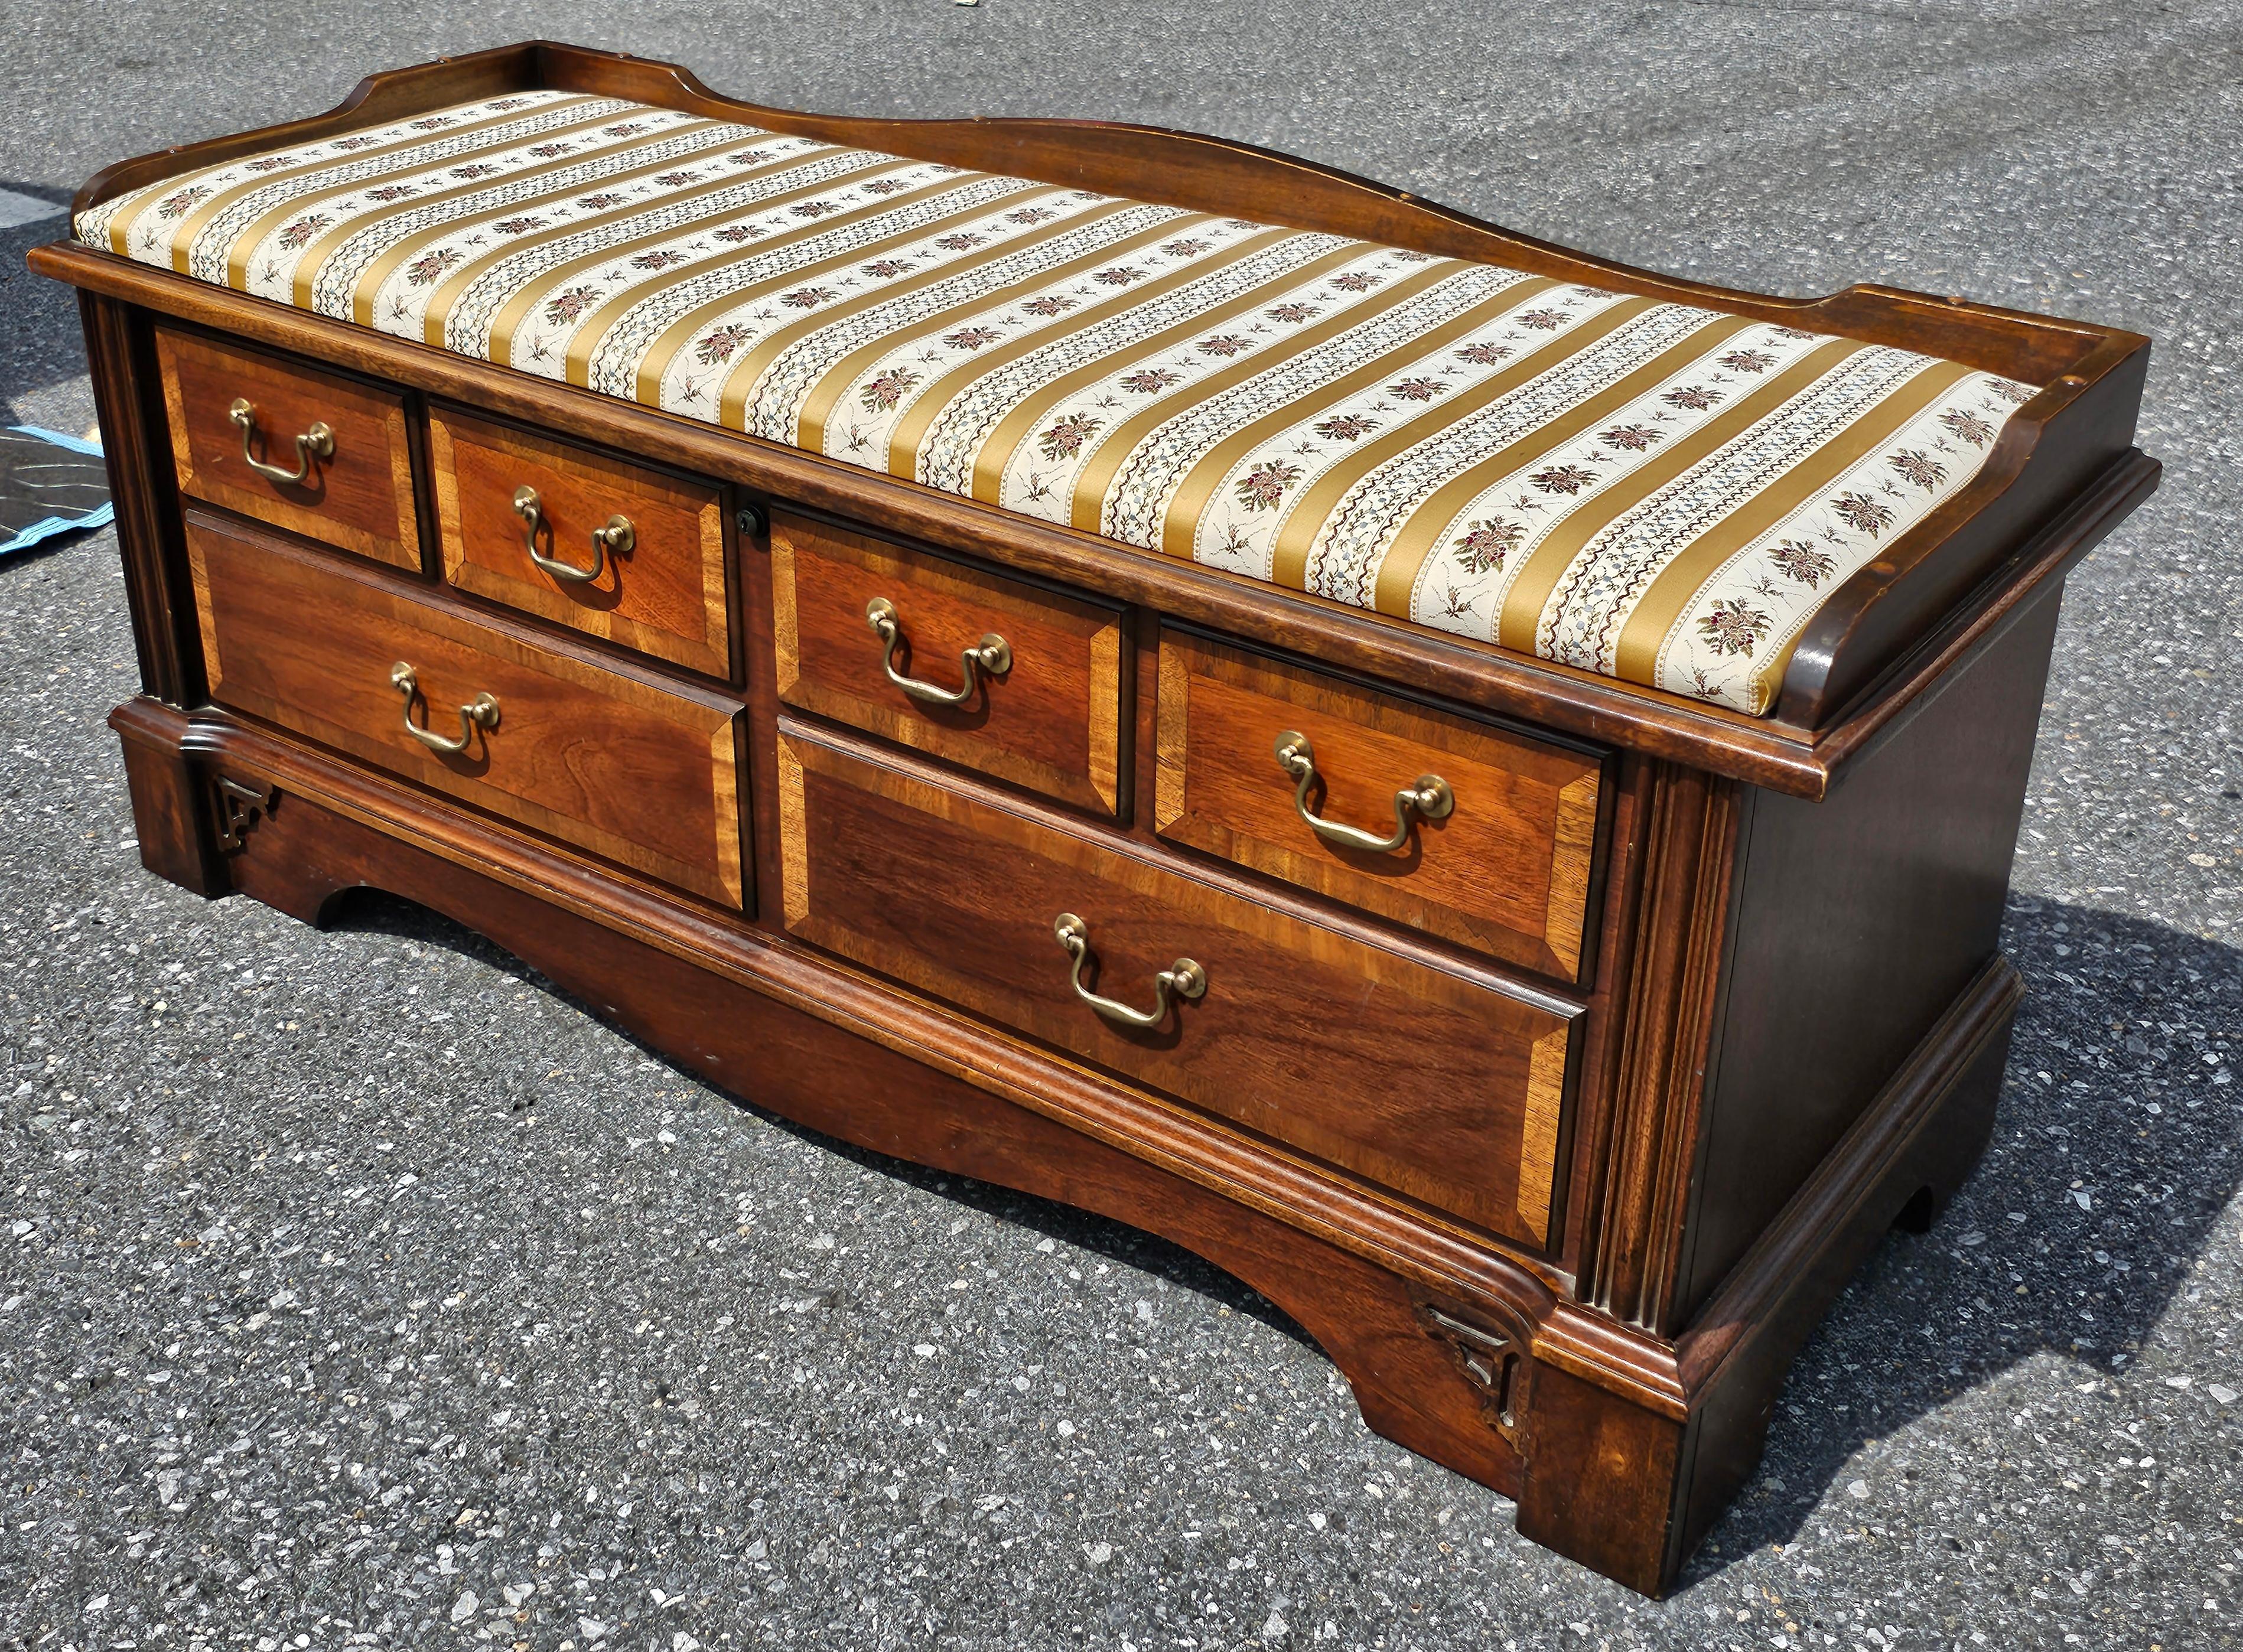 An exquisite Lane Furniture Chippendale Style Cedar Lined and  Banded Mahogany Blanket Chest and Upholtered top Bench. Great vintage condition. Measures 48